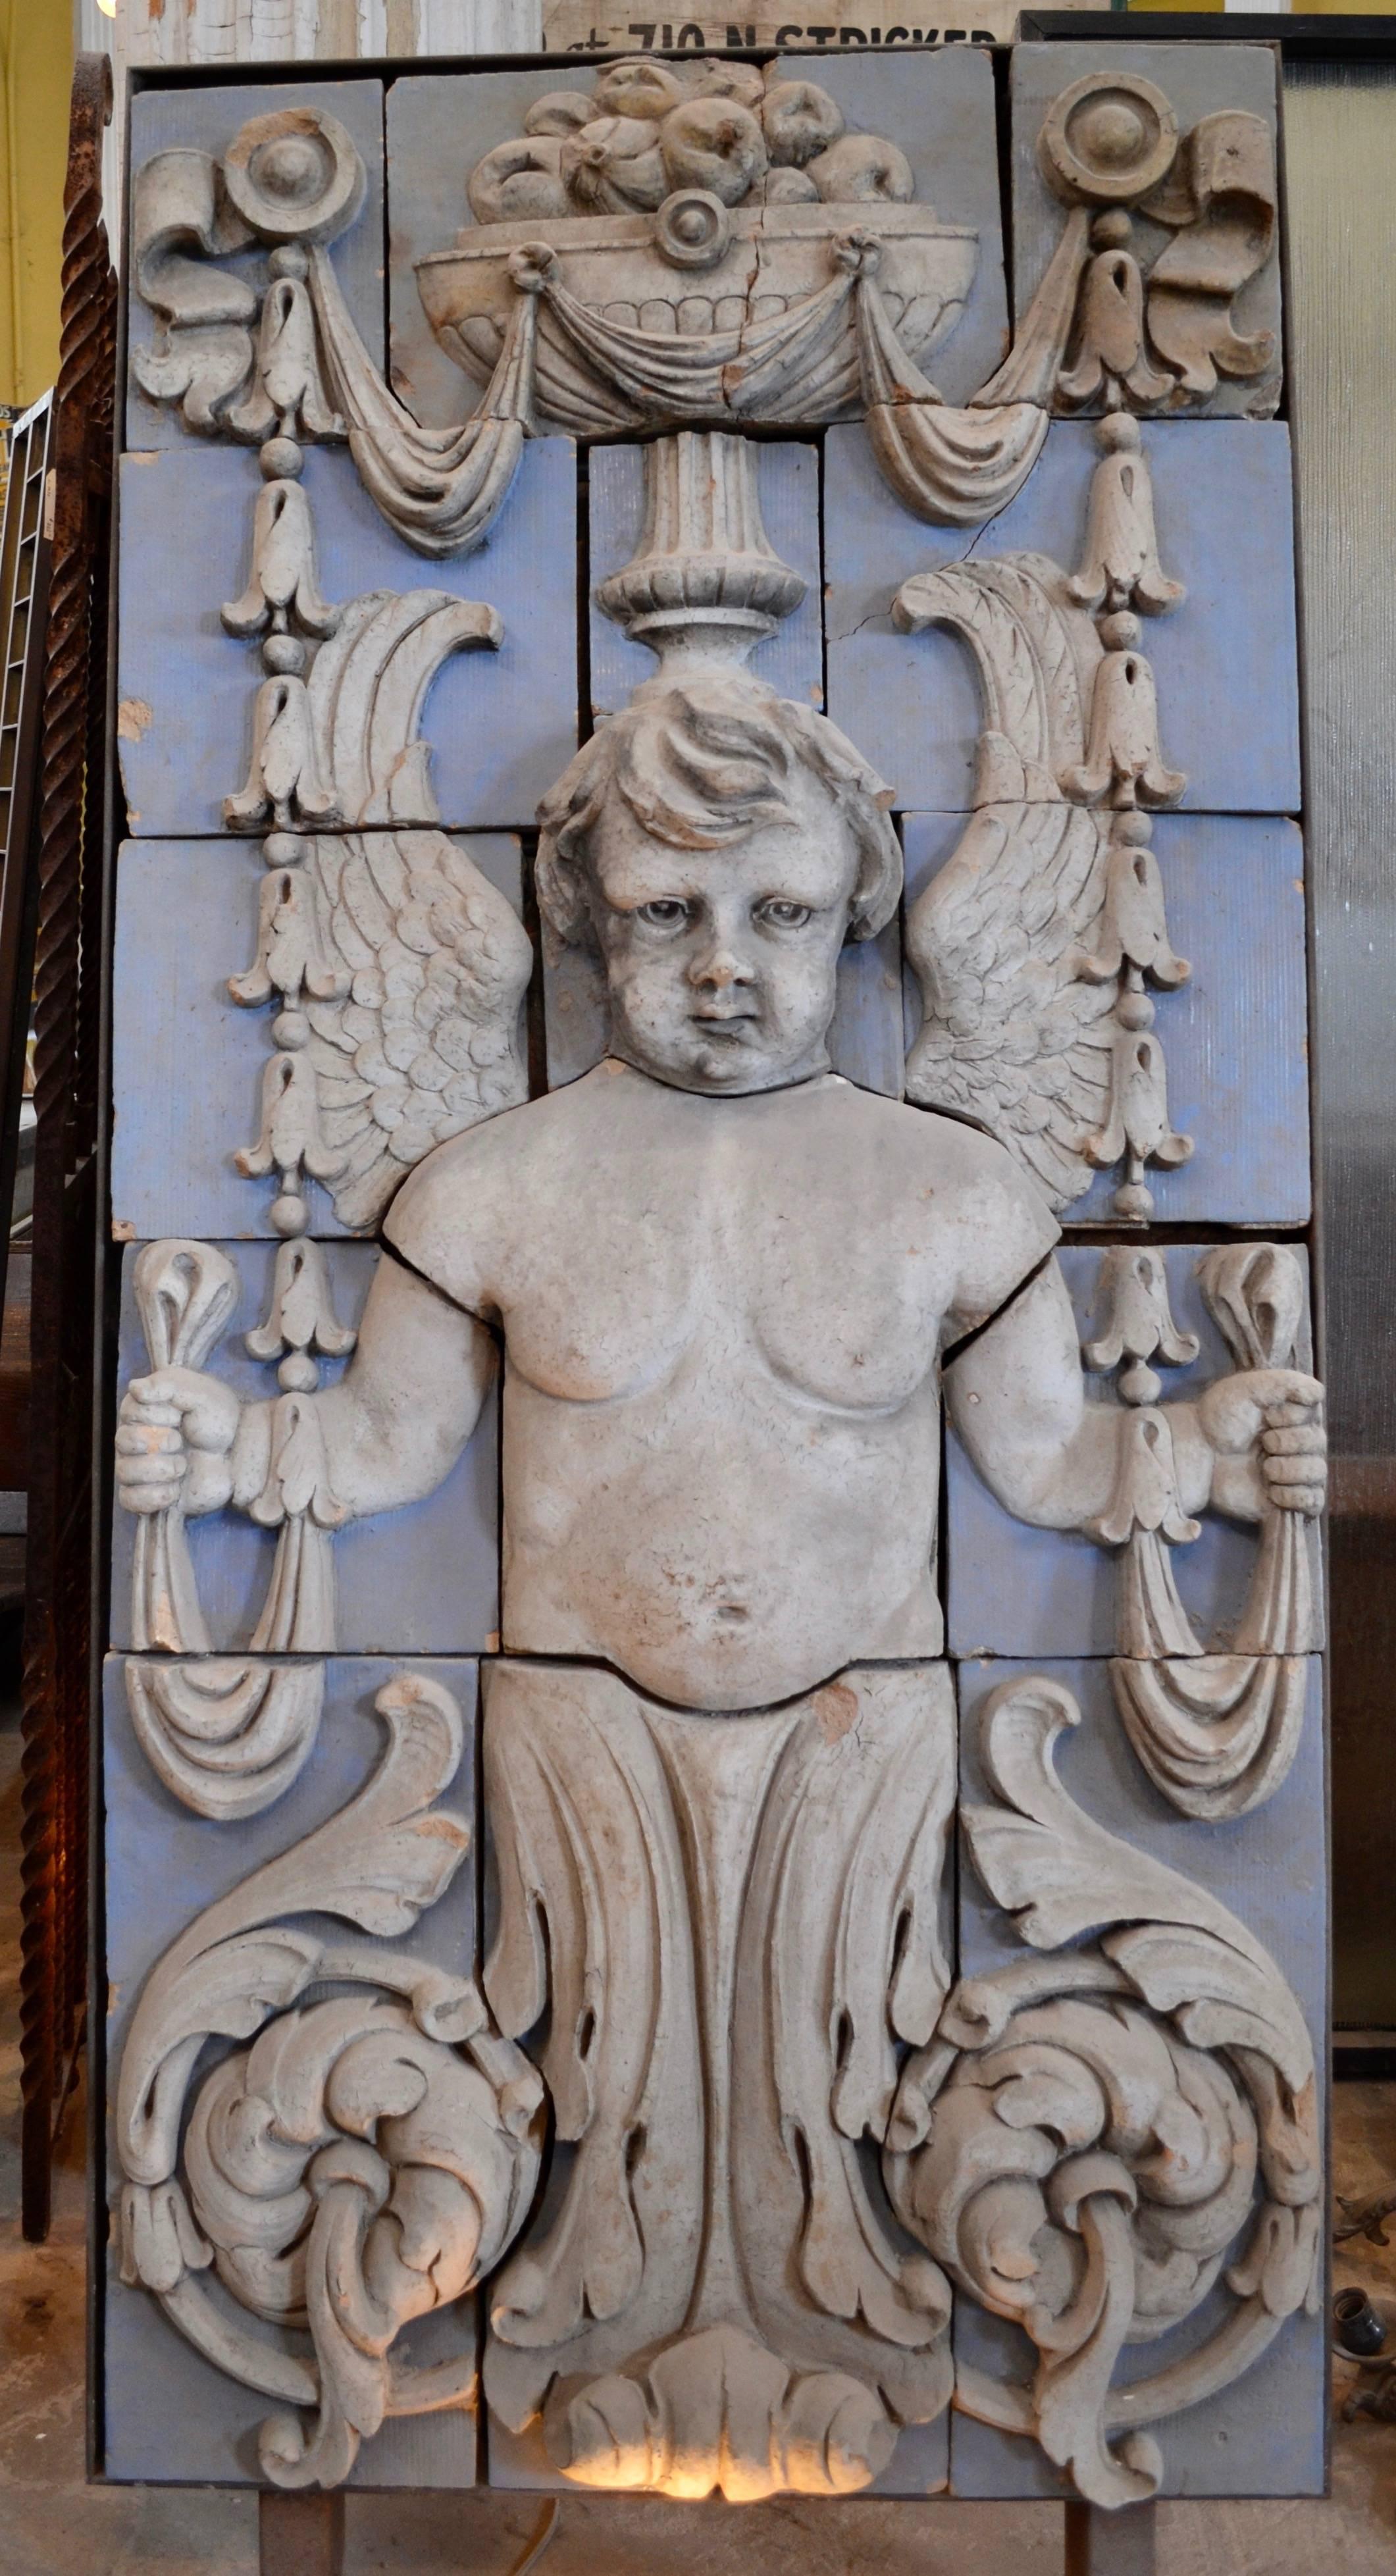 A polychrome terracotta angel built in fifteen pieces, in the Luca Della Robbia tradition, salvaged from the Southern Hotel in downtown Baltimore, which was demolished in 1917.  Celebrated for its rooftop restaurant and music venue, the hotel hosted